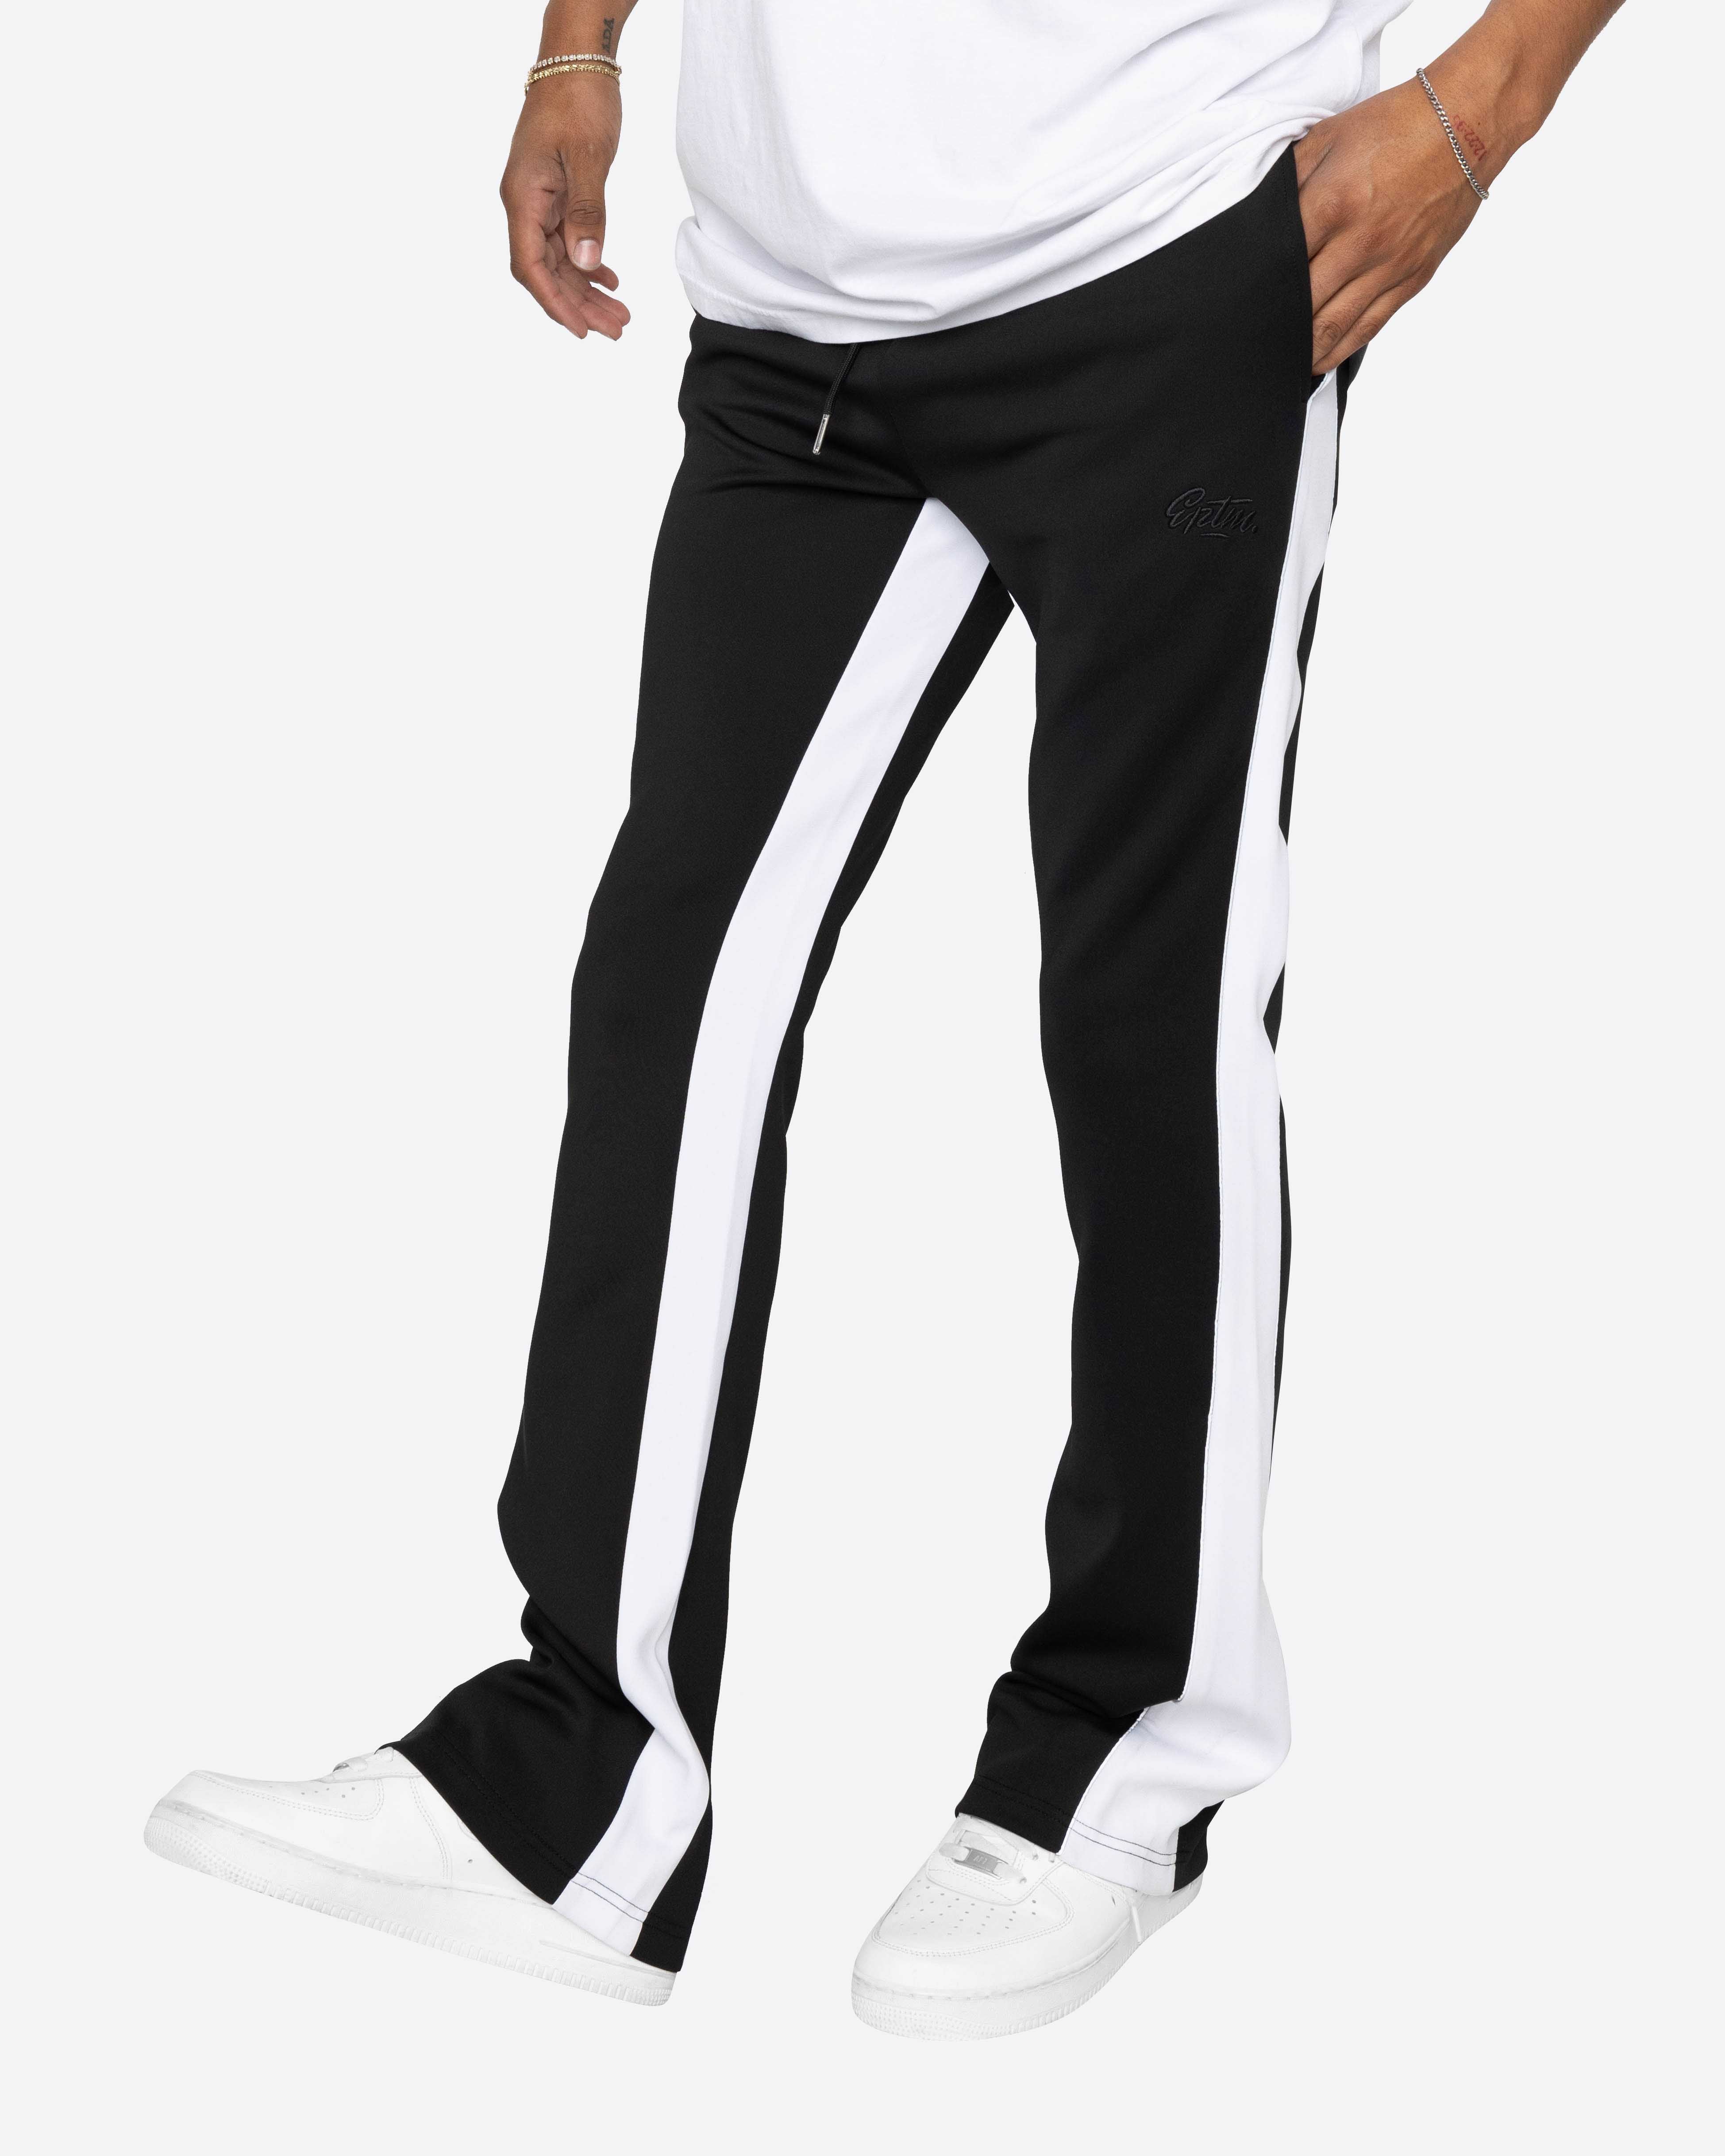 Buy Blue Track Pants for Men by PERFORMAX Online | Ajio.com